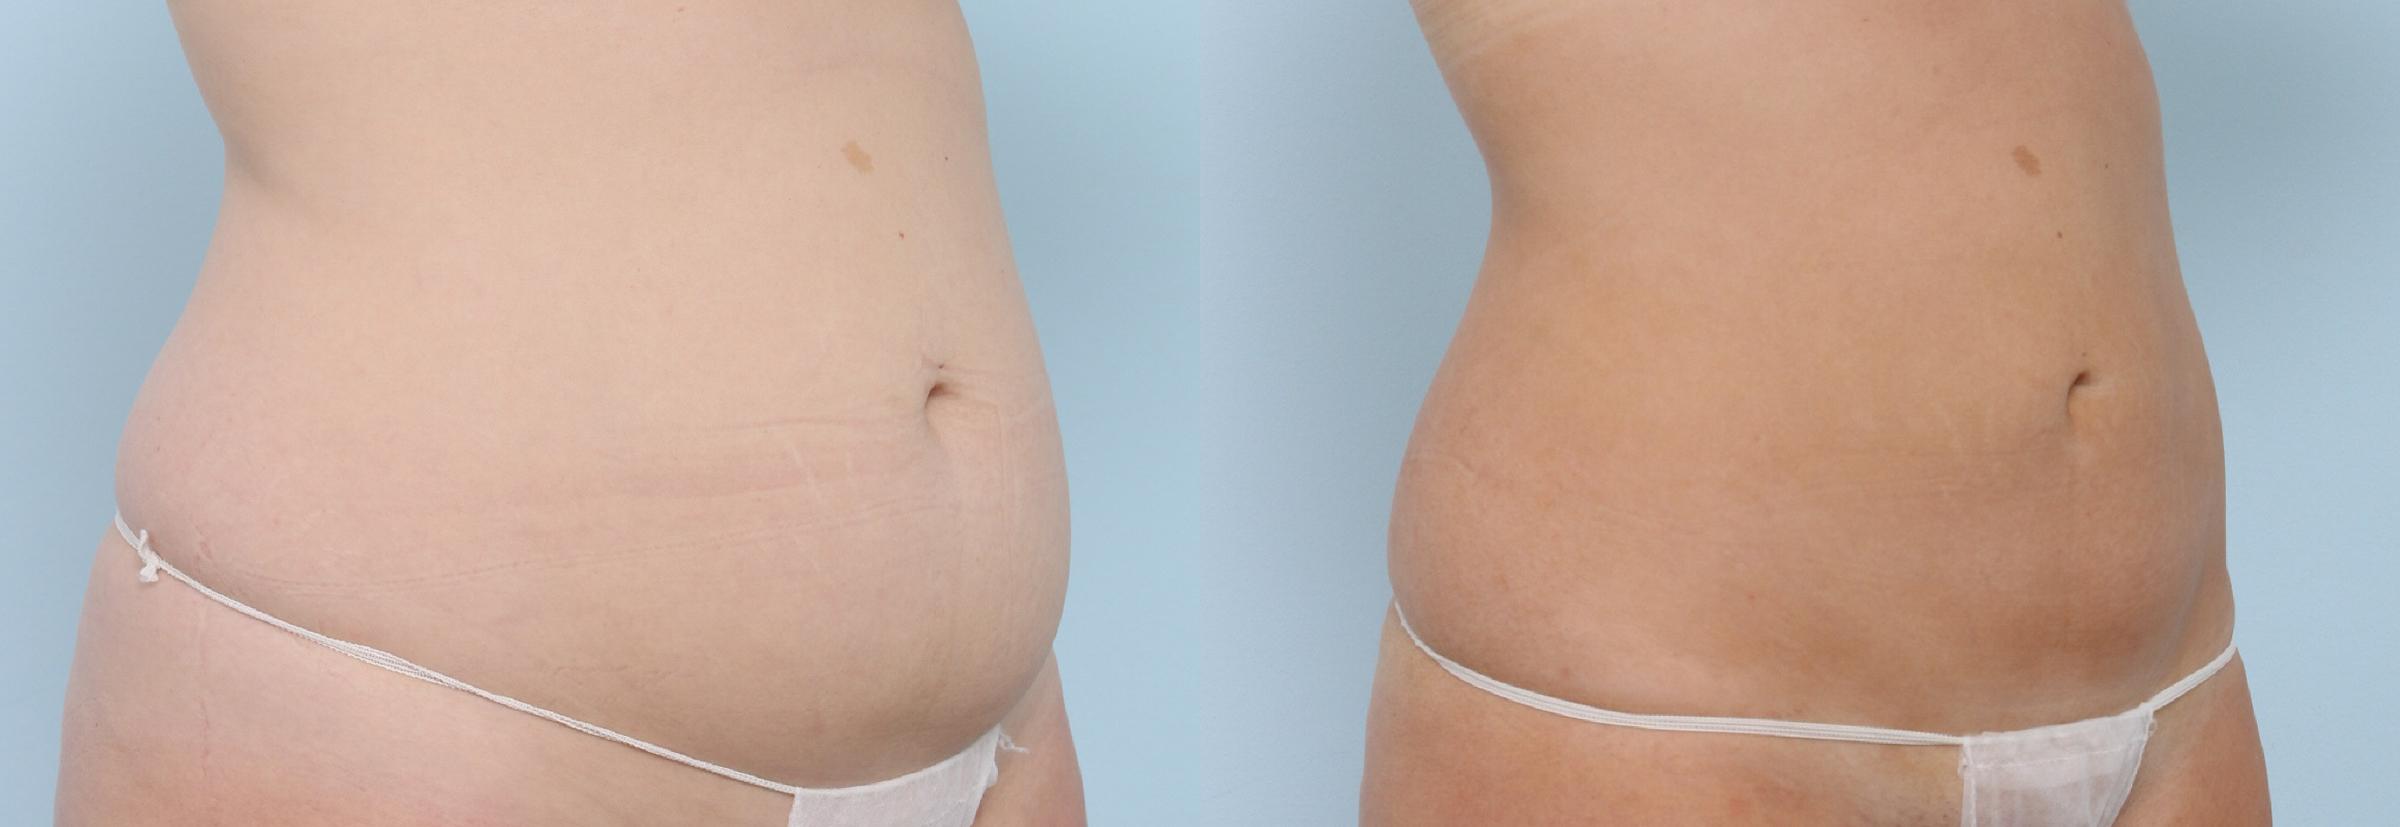  before and after pictures in , , The Truth Behind the Five Most Common CoolSculpting Myths